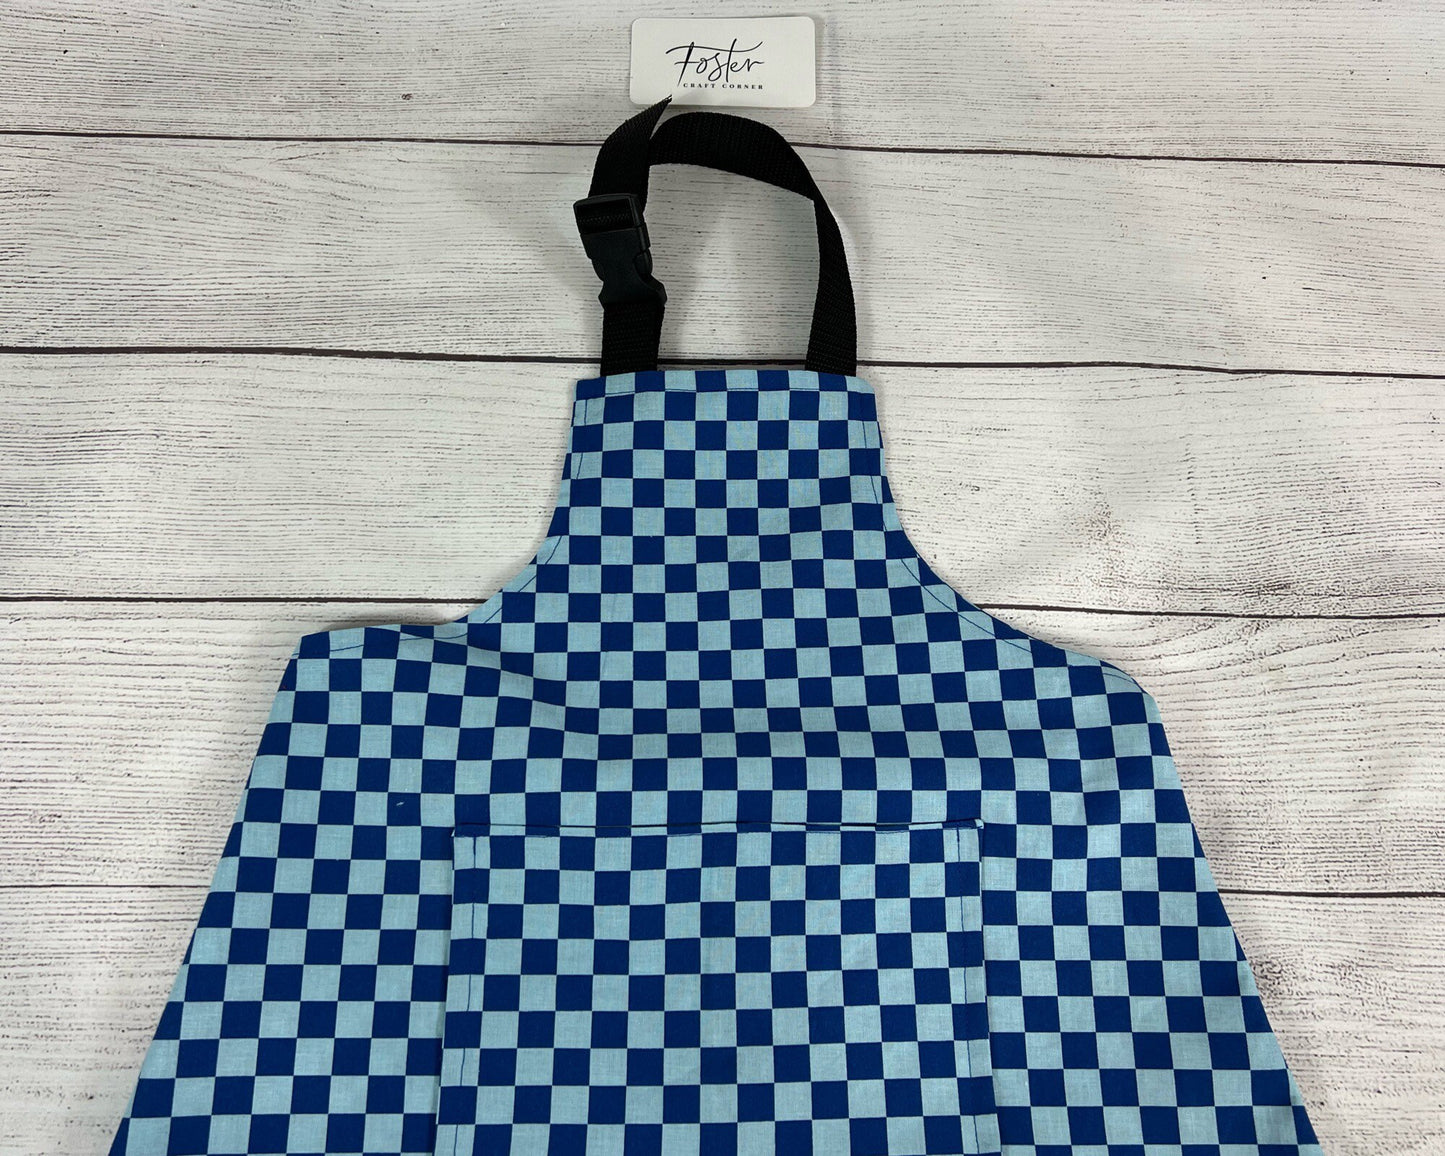 Toddler Apron - Kitchen - Cooking - Early Cooking Skills - Toddler Messes - Toddler Accessories - Blue Checker - Racing Checks - Small Apron